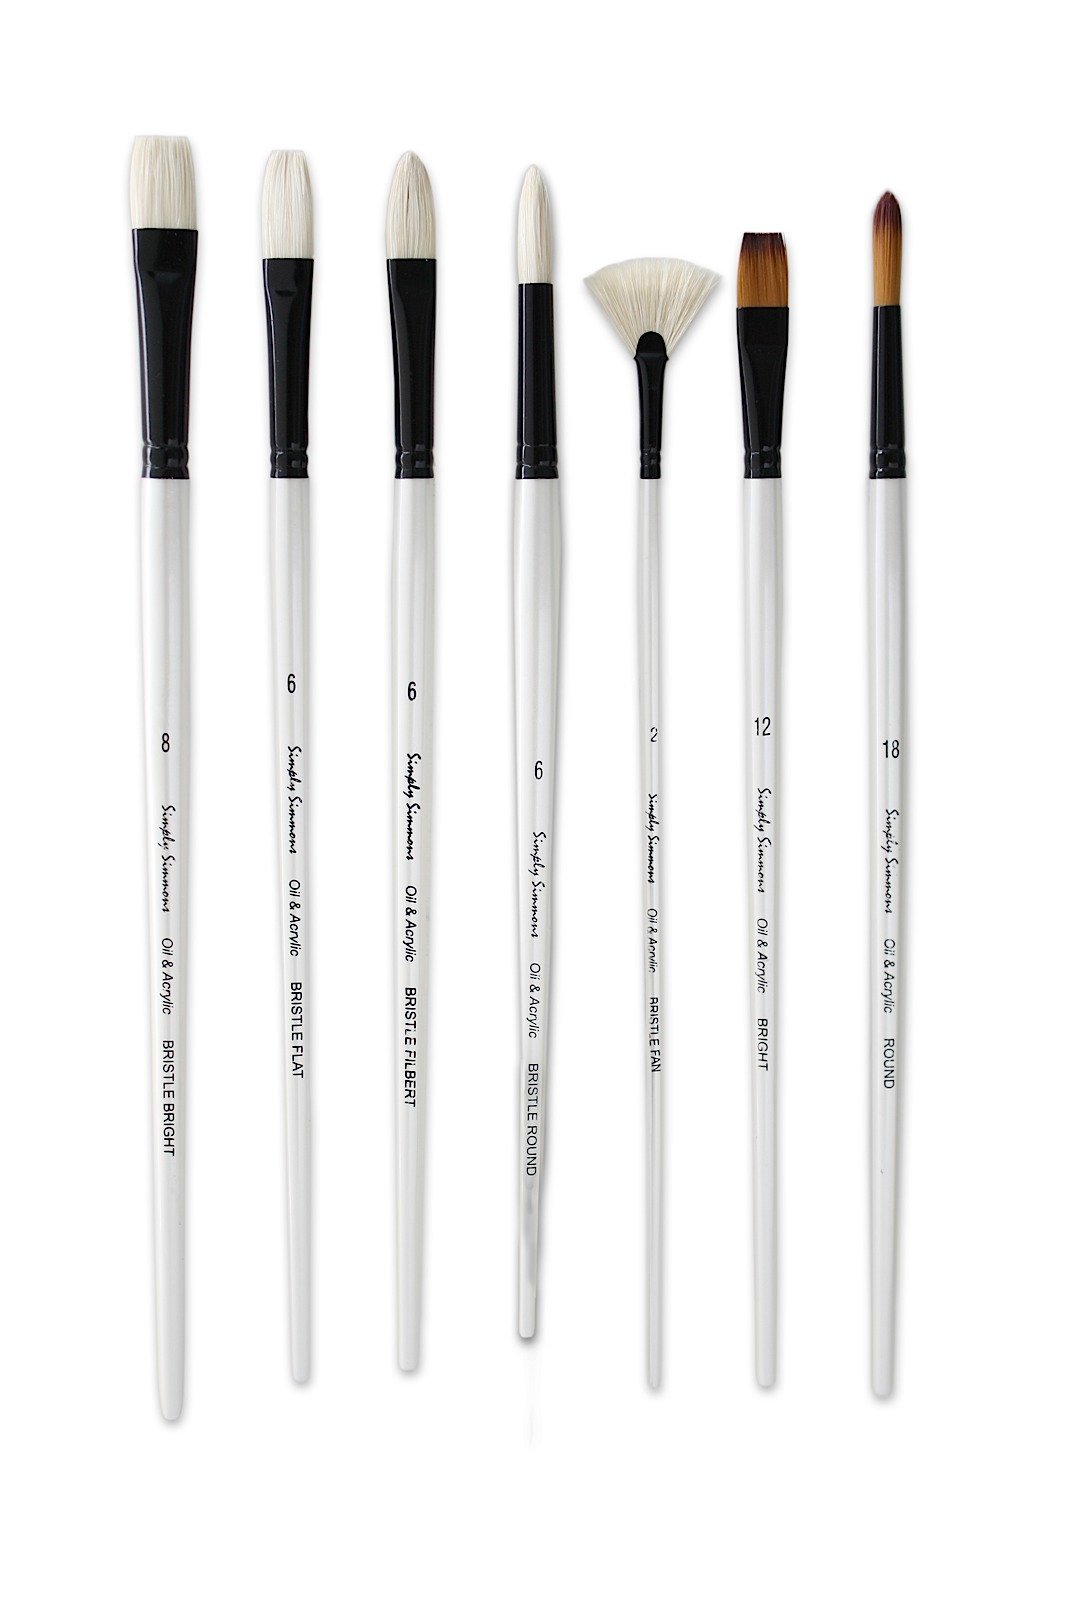 Daler-Rowney Simply Simmons Long Handle Brushes